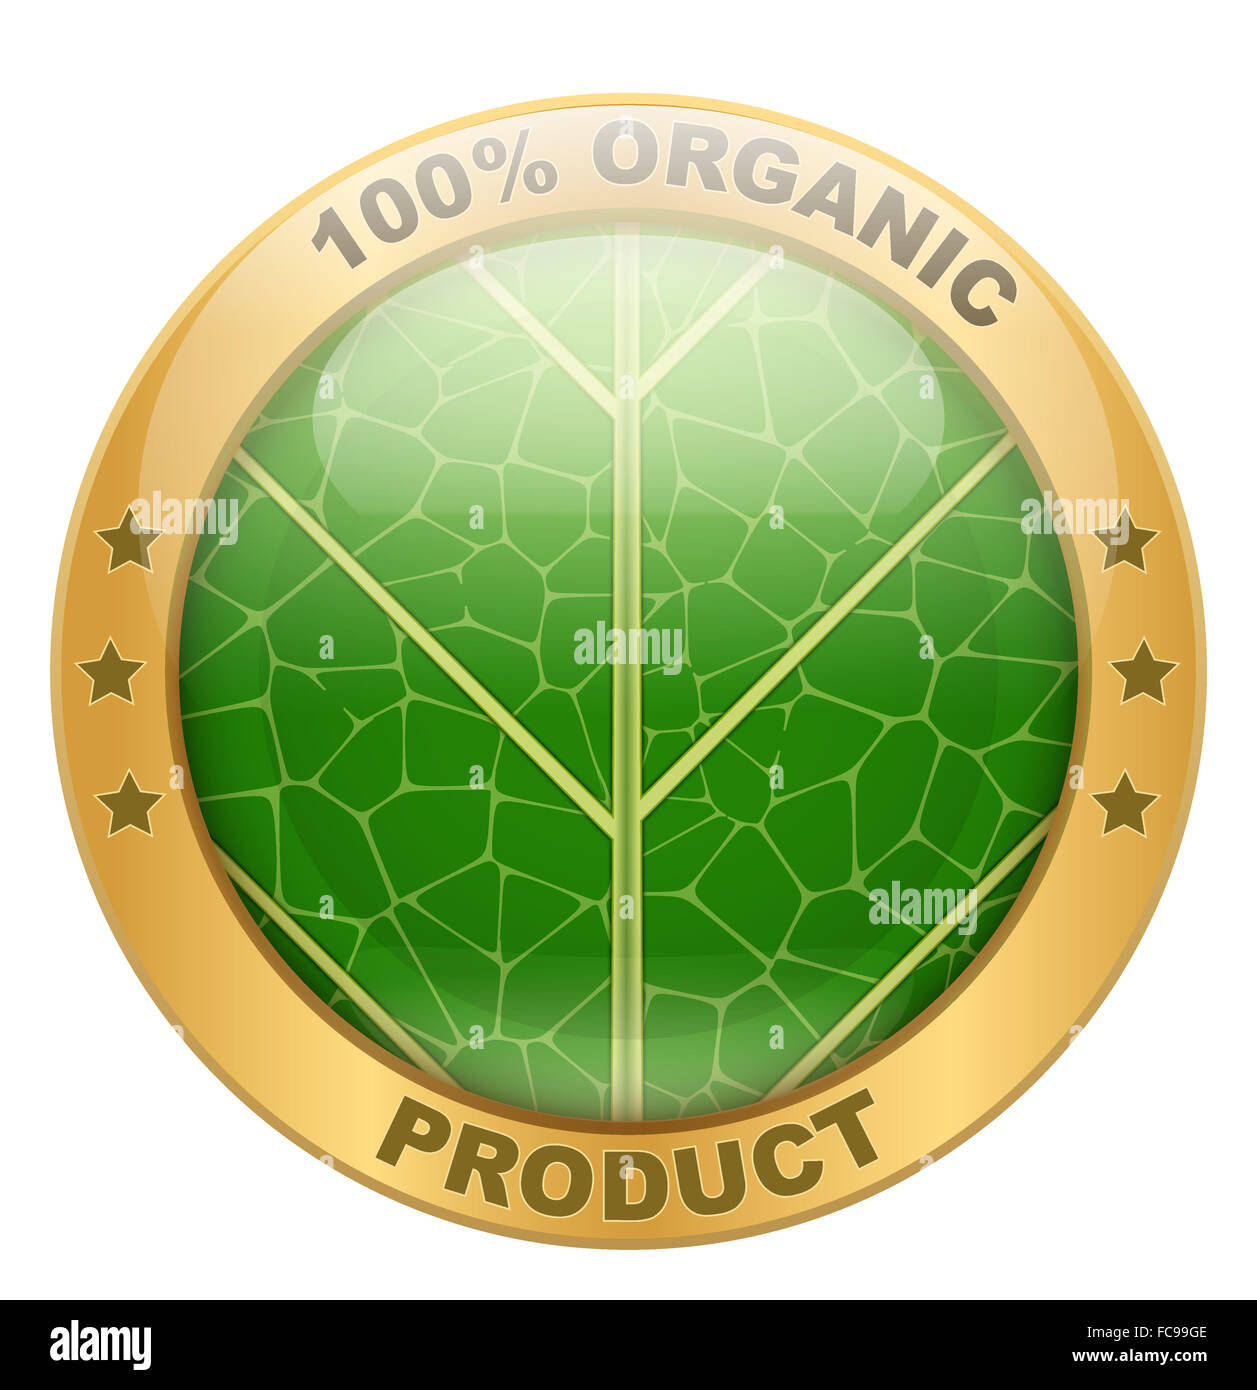 Icon of organic for food or drinks. Stock Photo